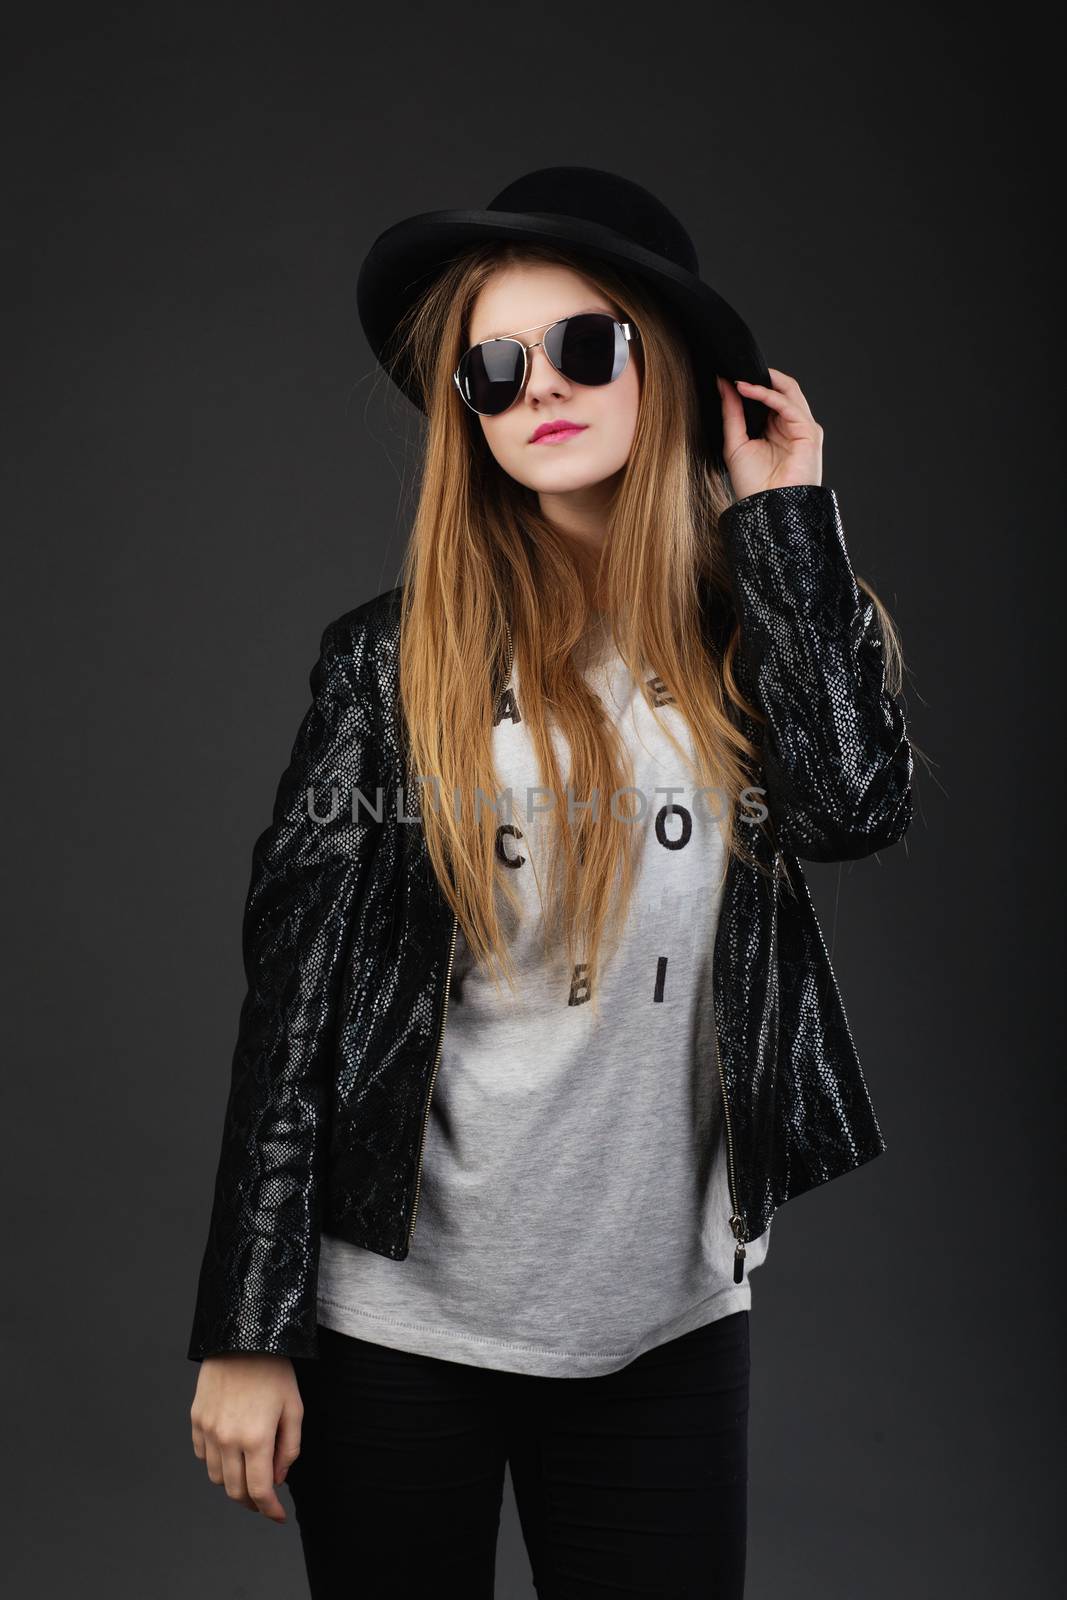 Portrait of beautiful young girl wearing black felt hat, Sunglasses and leather jacket in front of a dark gray background